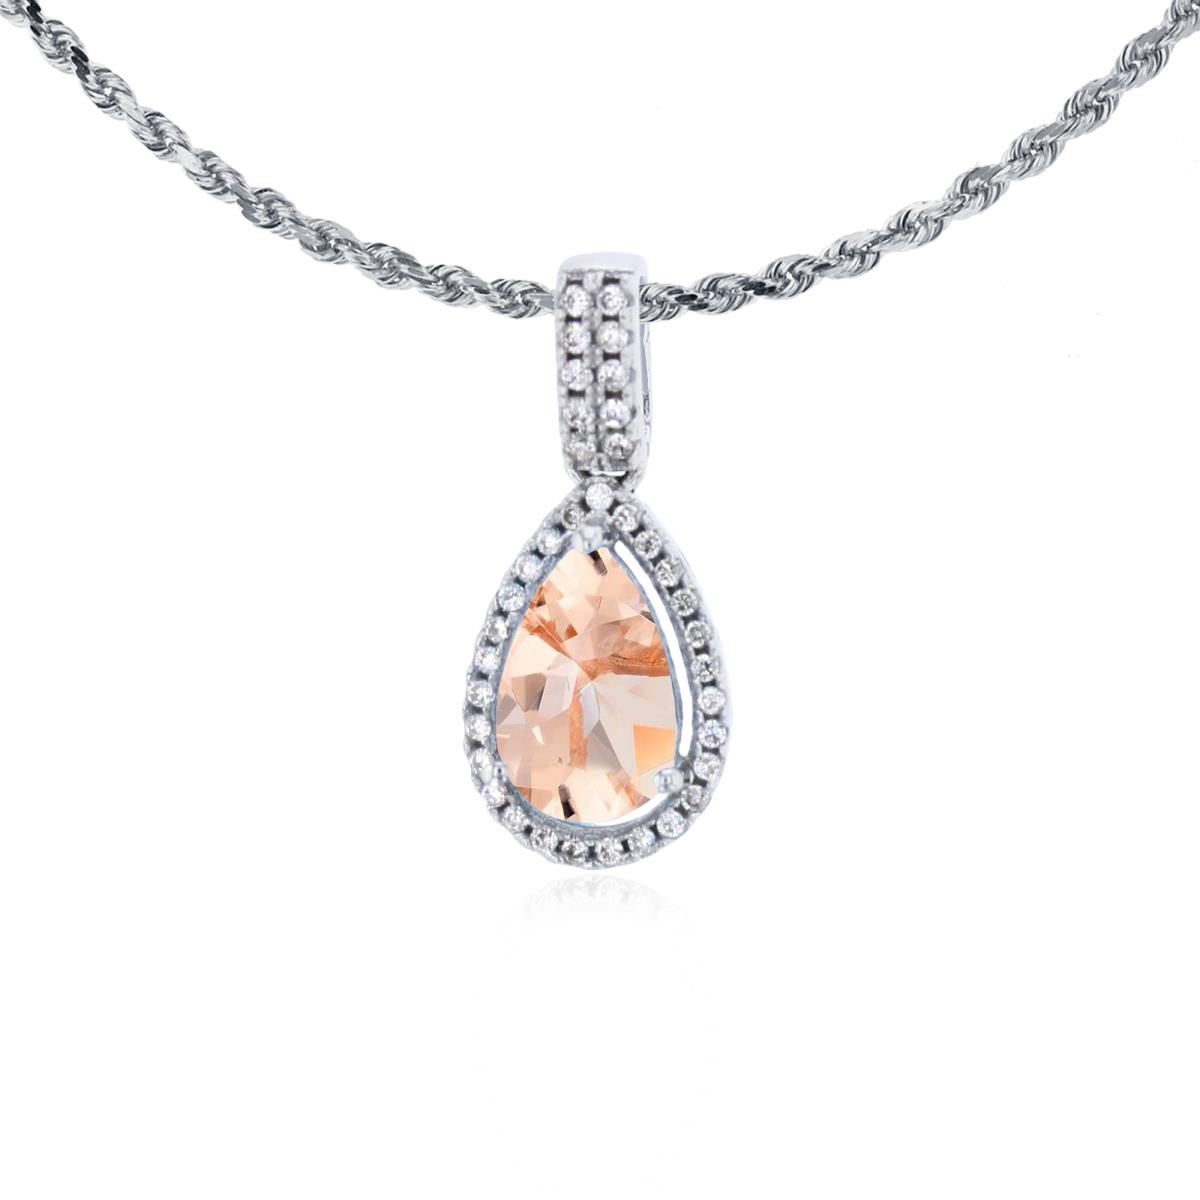 10K White Gold 8x5mm Pear Cut Morganite & 0.11 CTTW Diamond Halo 18" Rope Chain Necklace